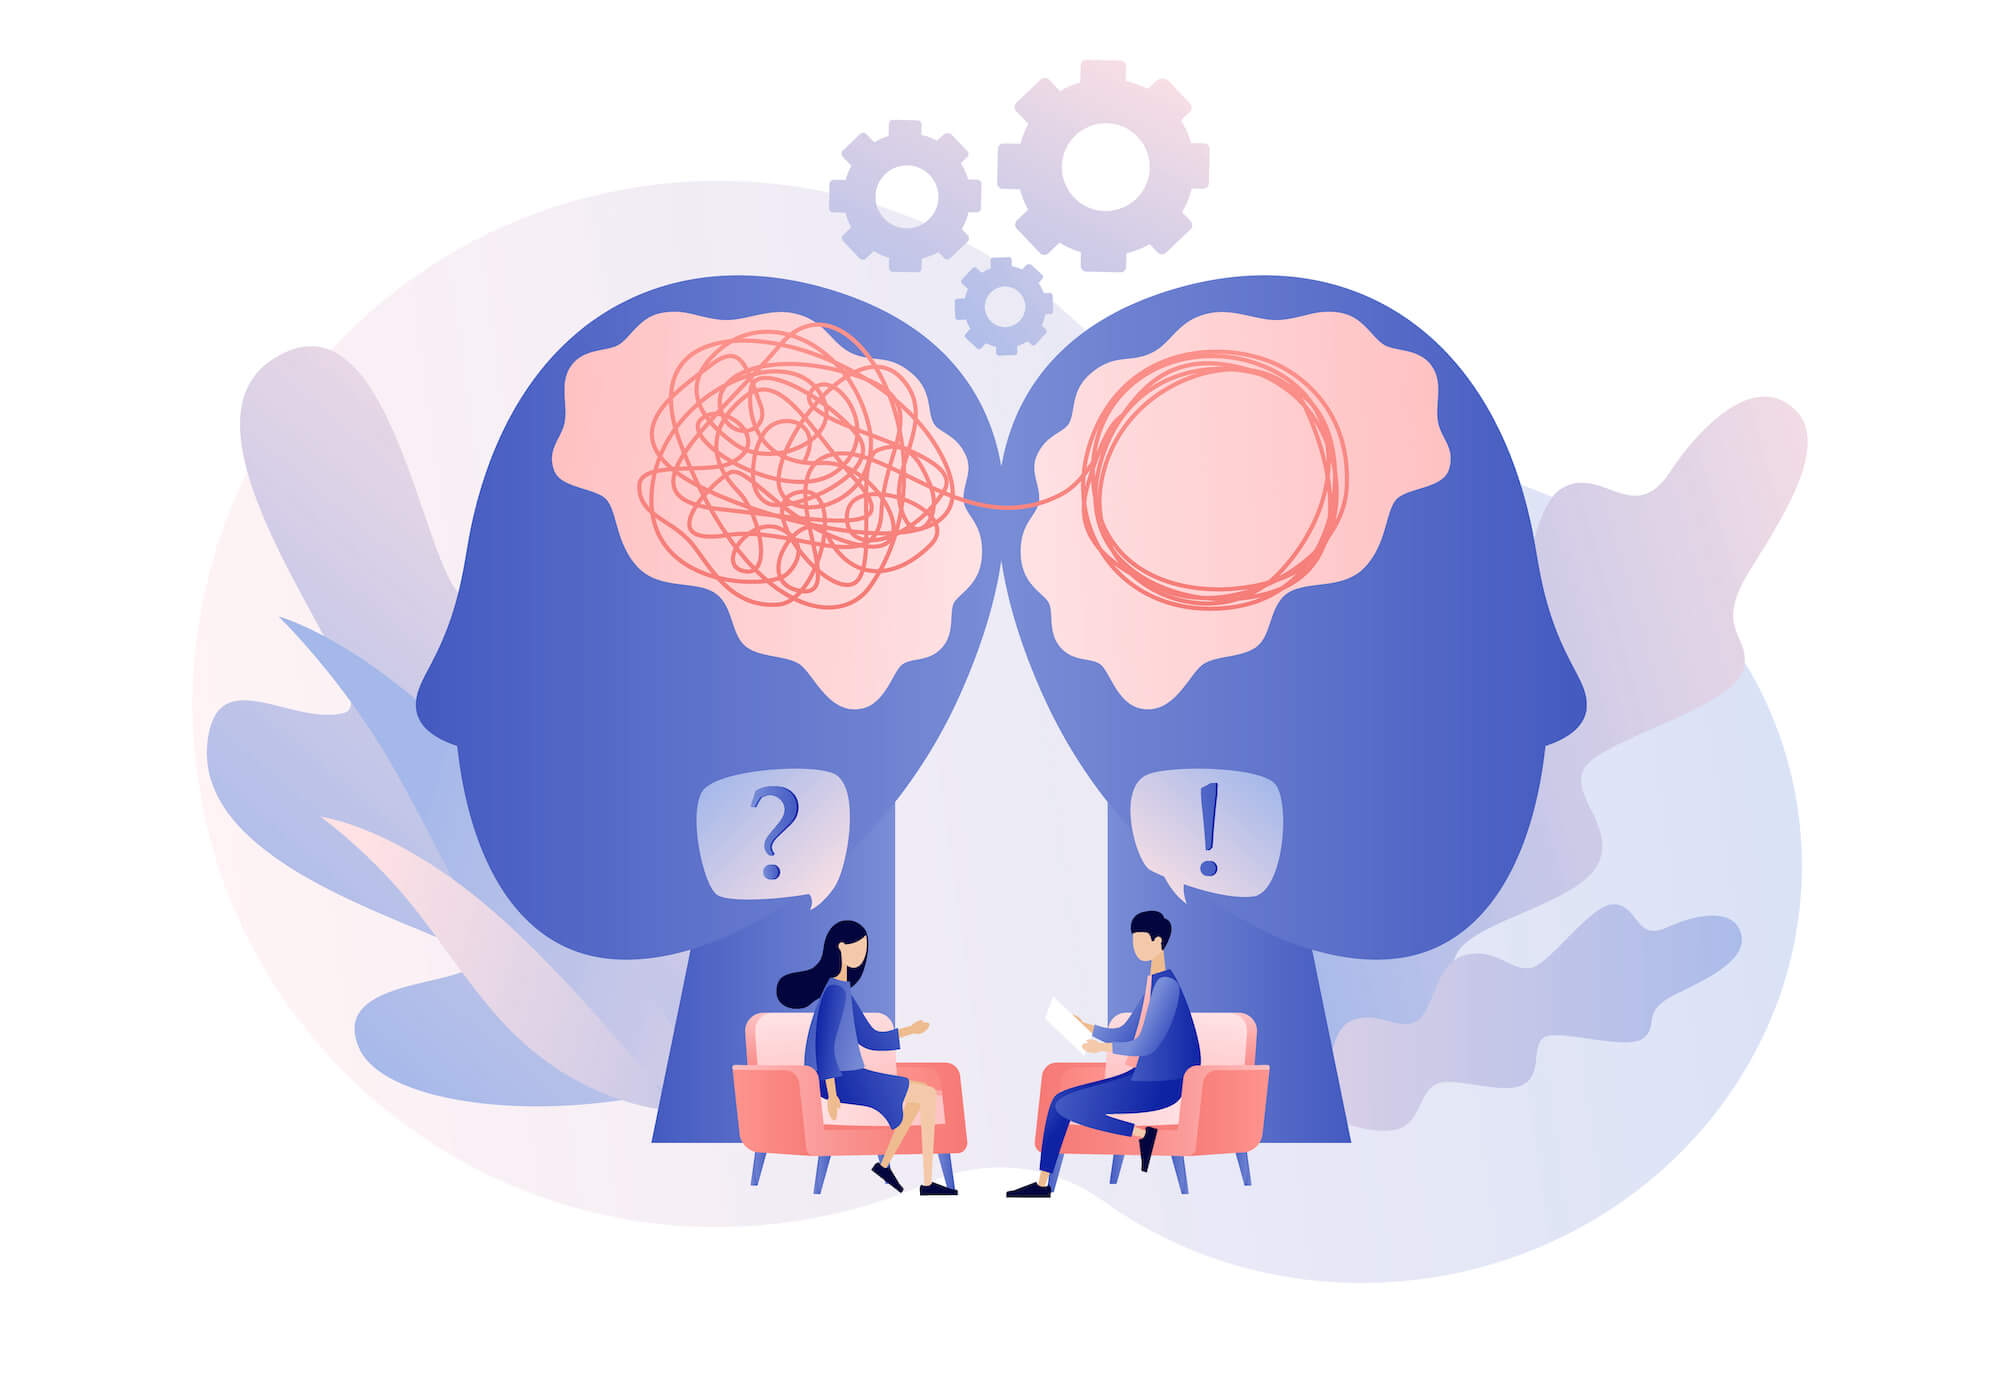 illustration of two minds and a therapy scene representing two individuals help to emotionally regulate each other